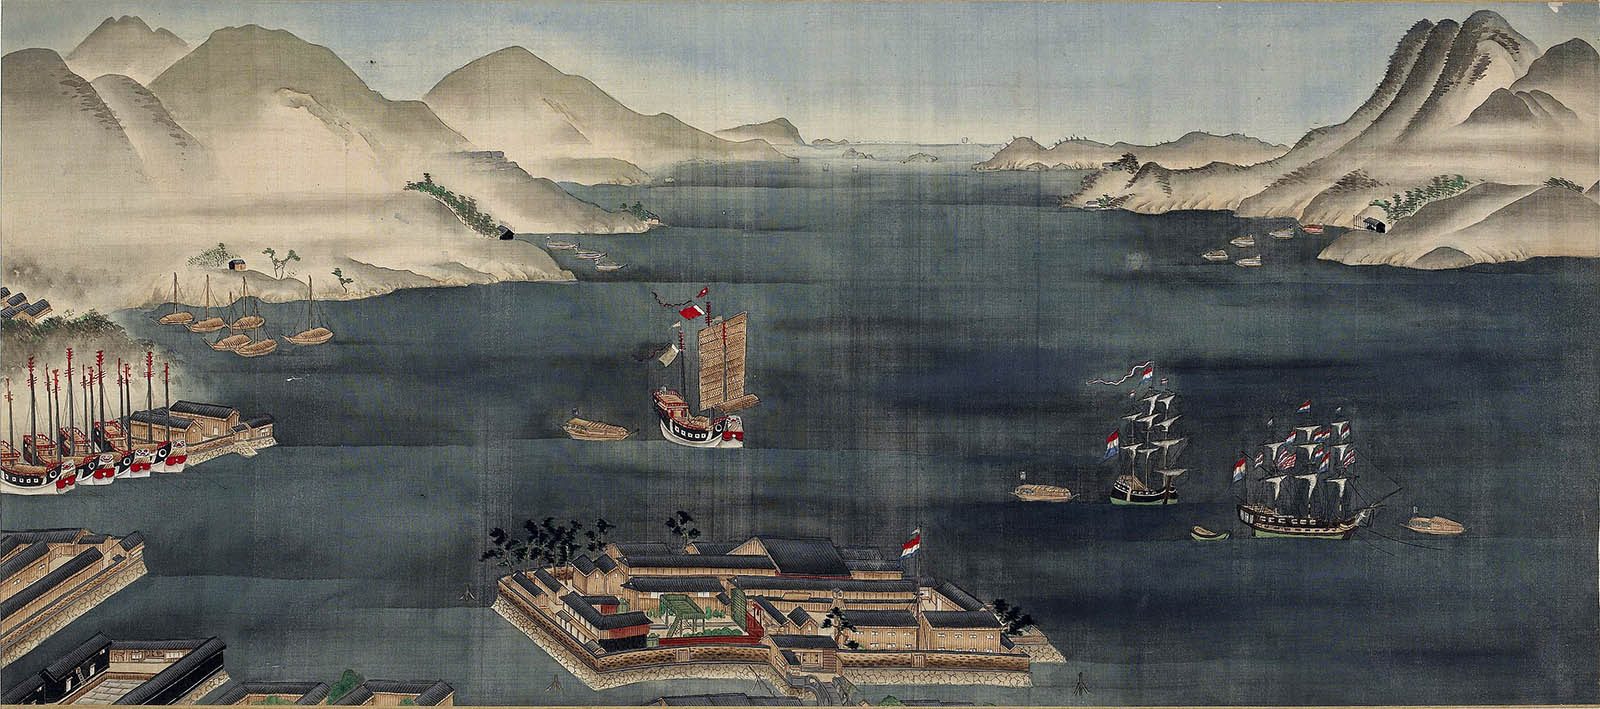 View of the island enclave of Deshima, in the port of Nagasaki, the only place where Dutch navigators could disembark for trade - Kawahara Keiga (川 原 慶賀) (1800-1820) - Public property, British Museum. 